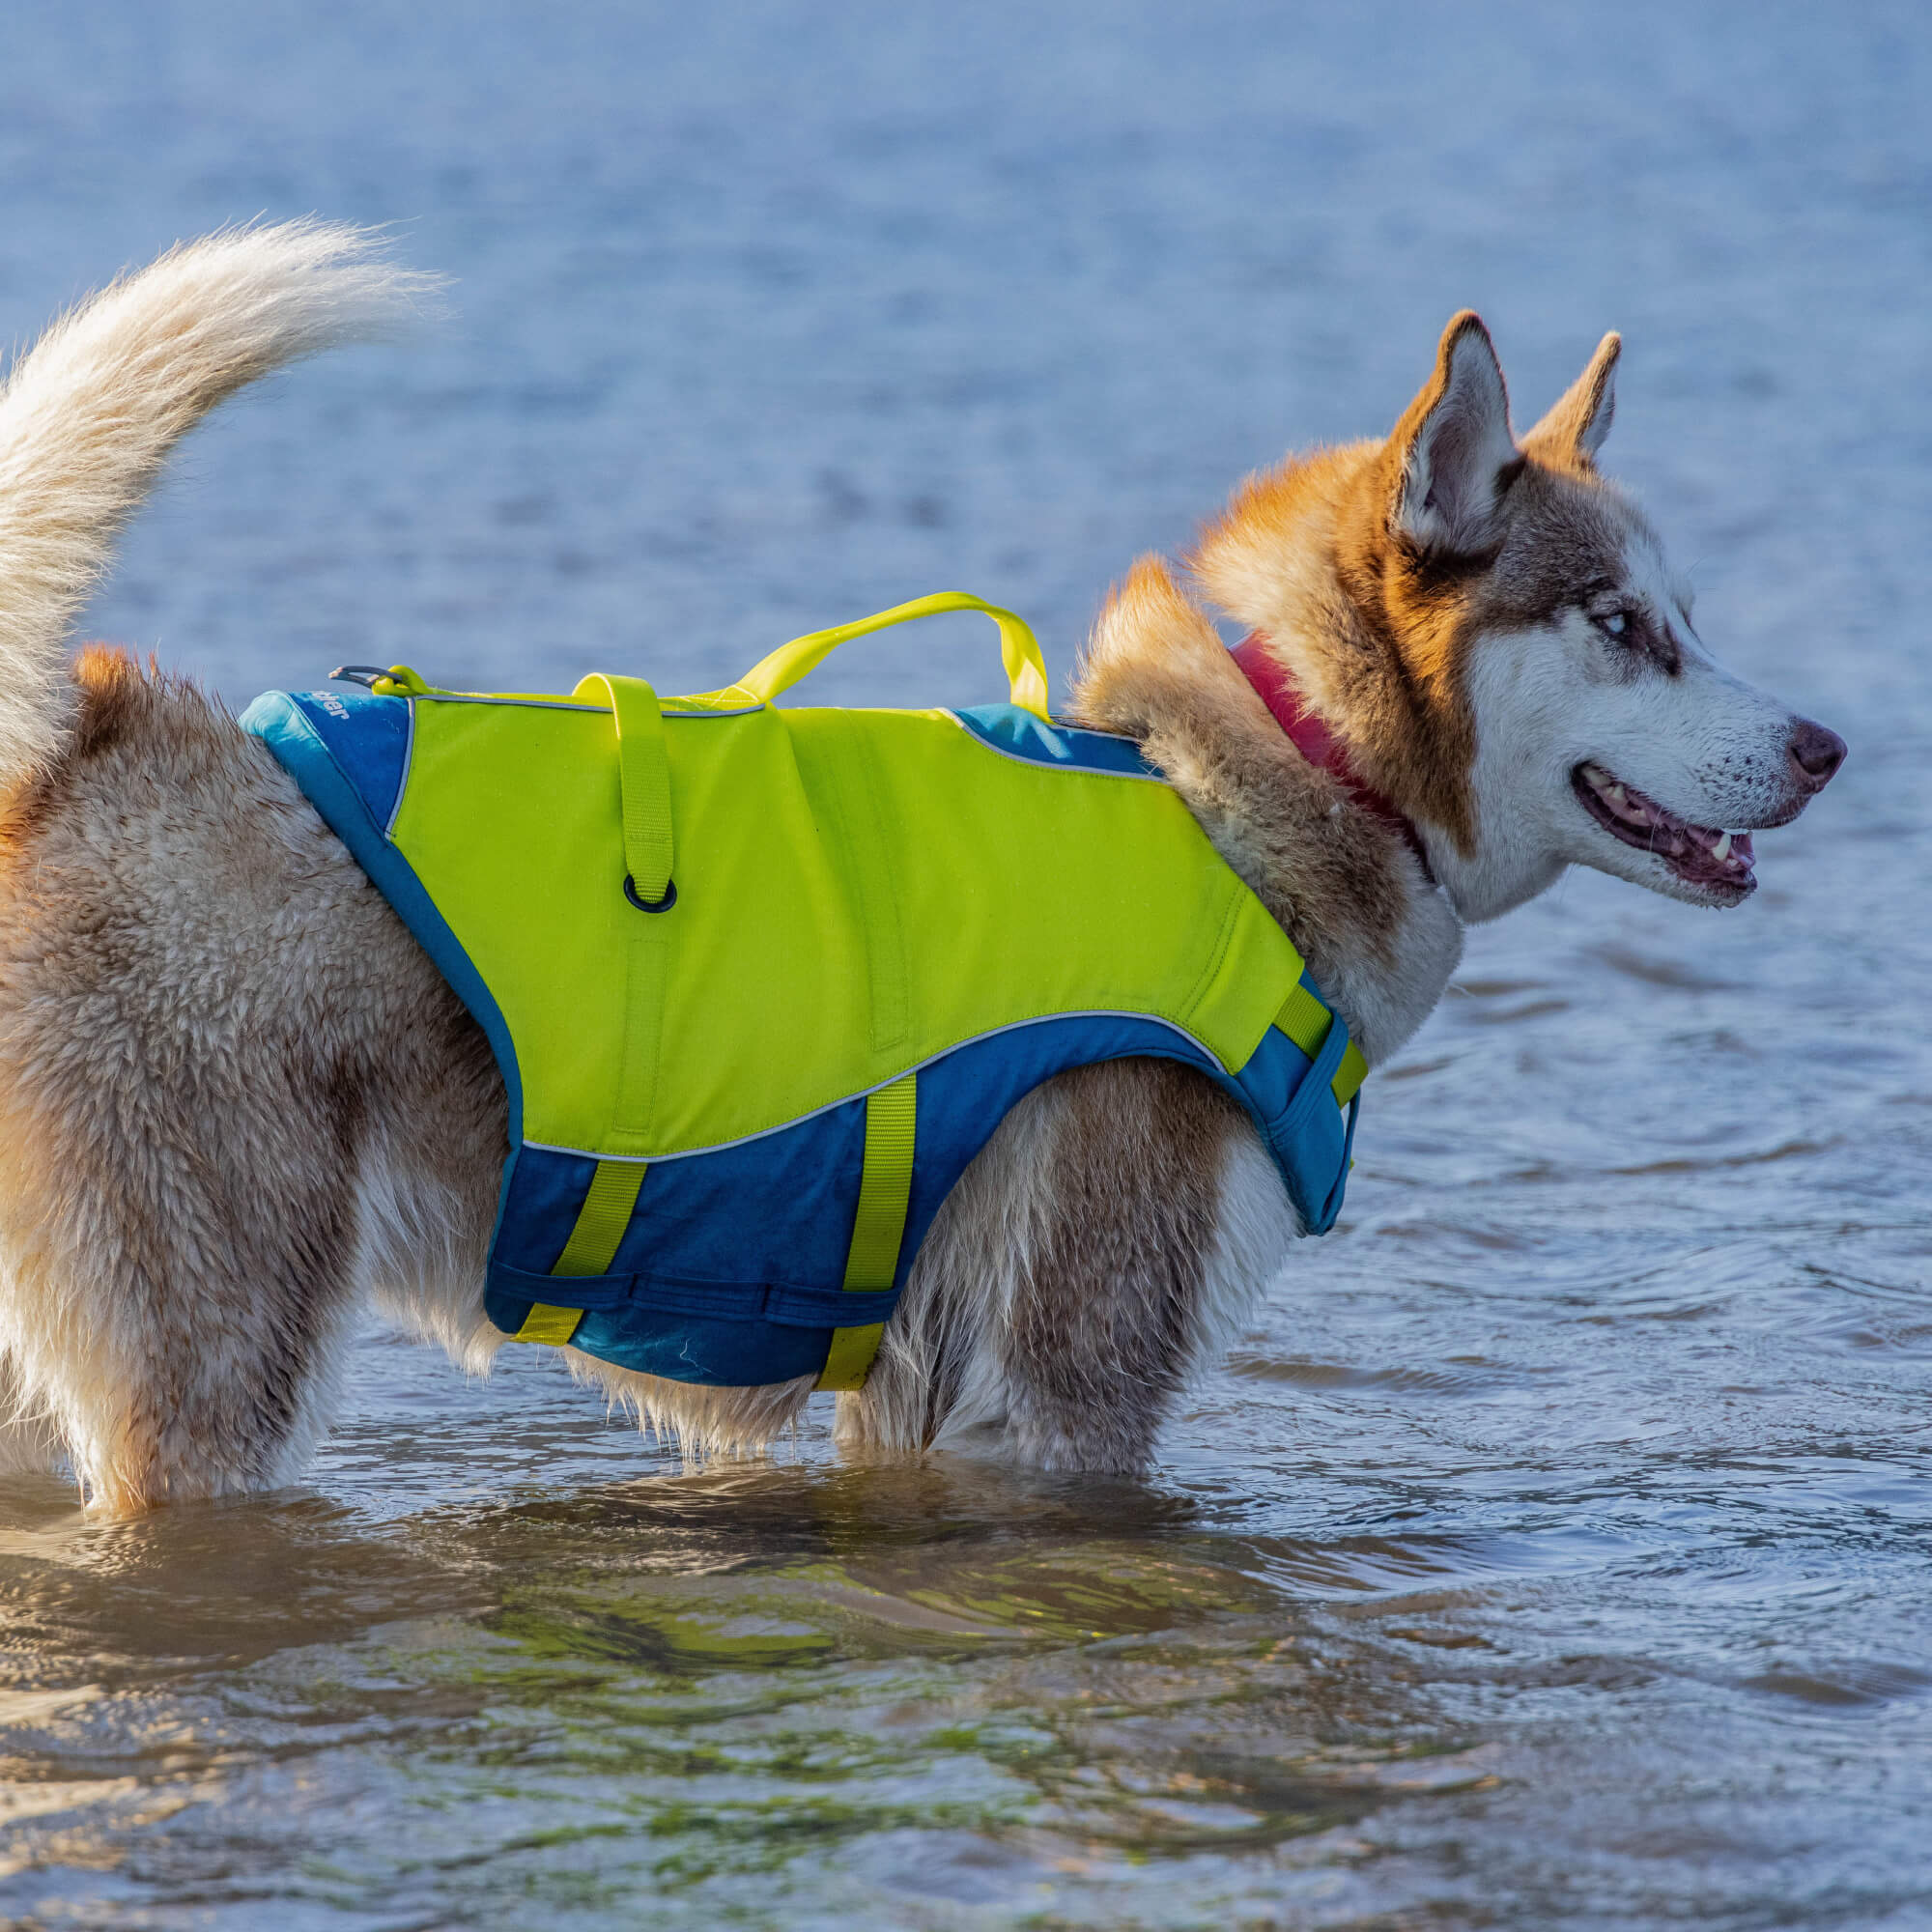 dog standing in water kurgo life jacket yellow for dogs 